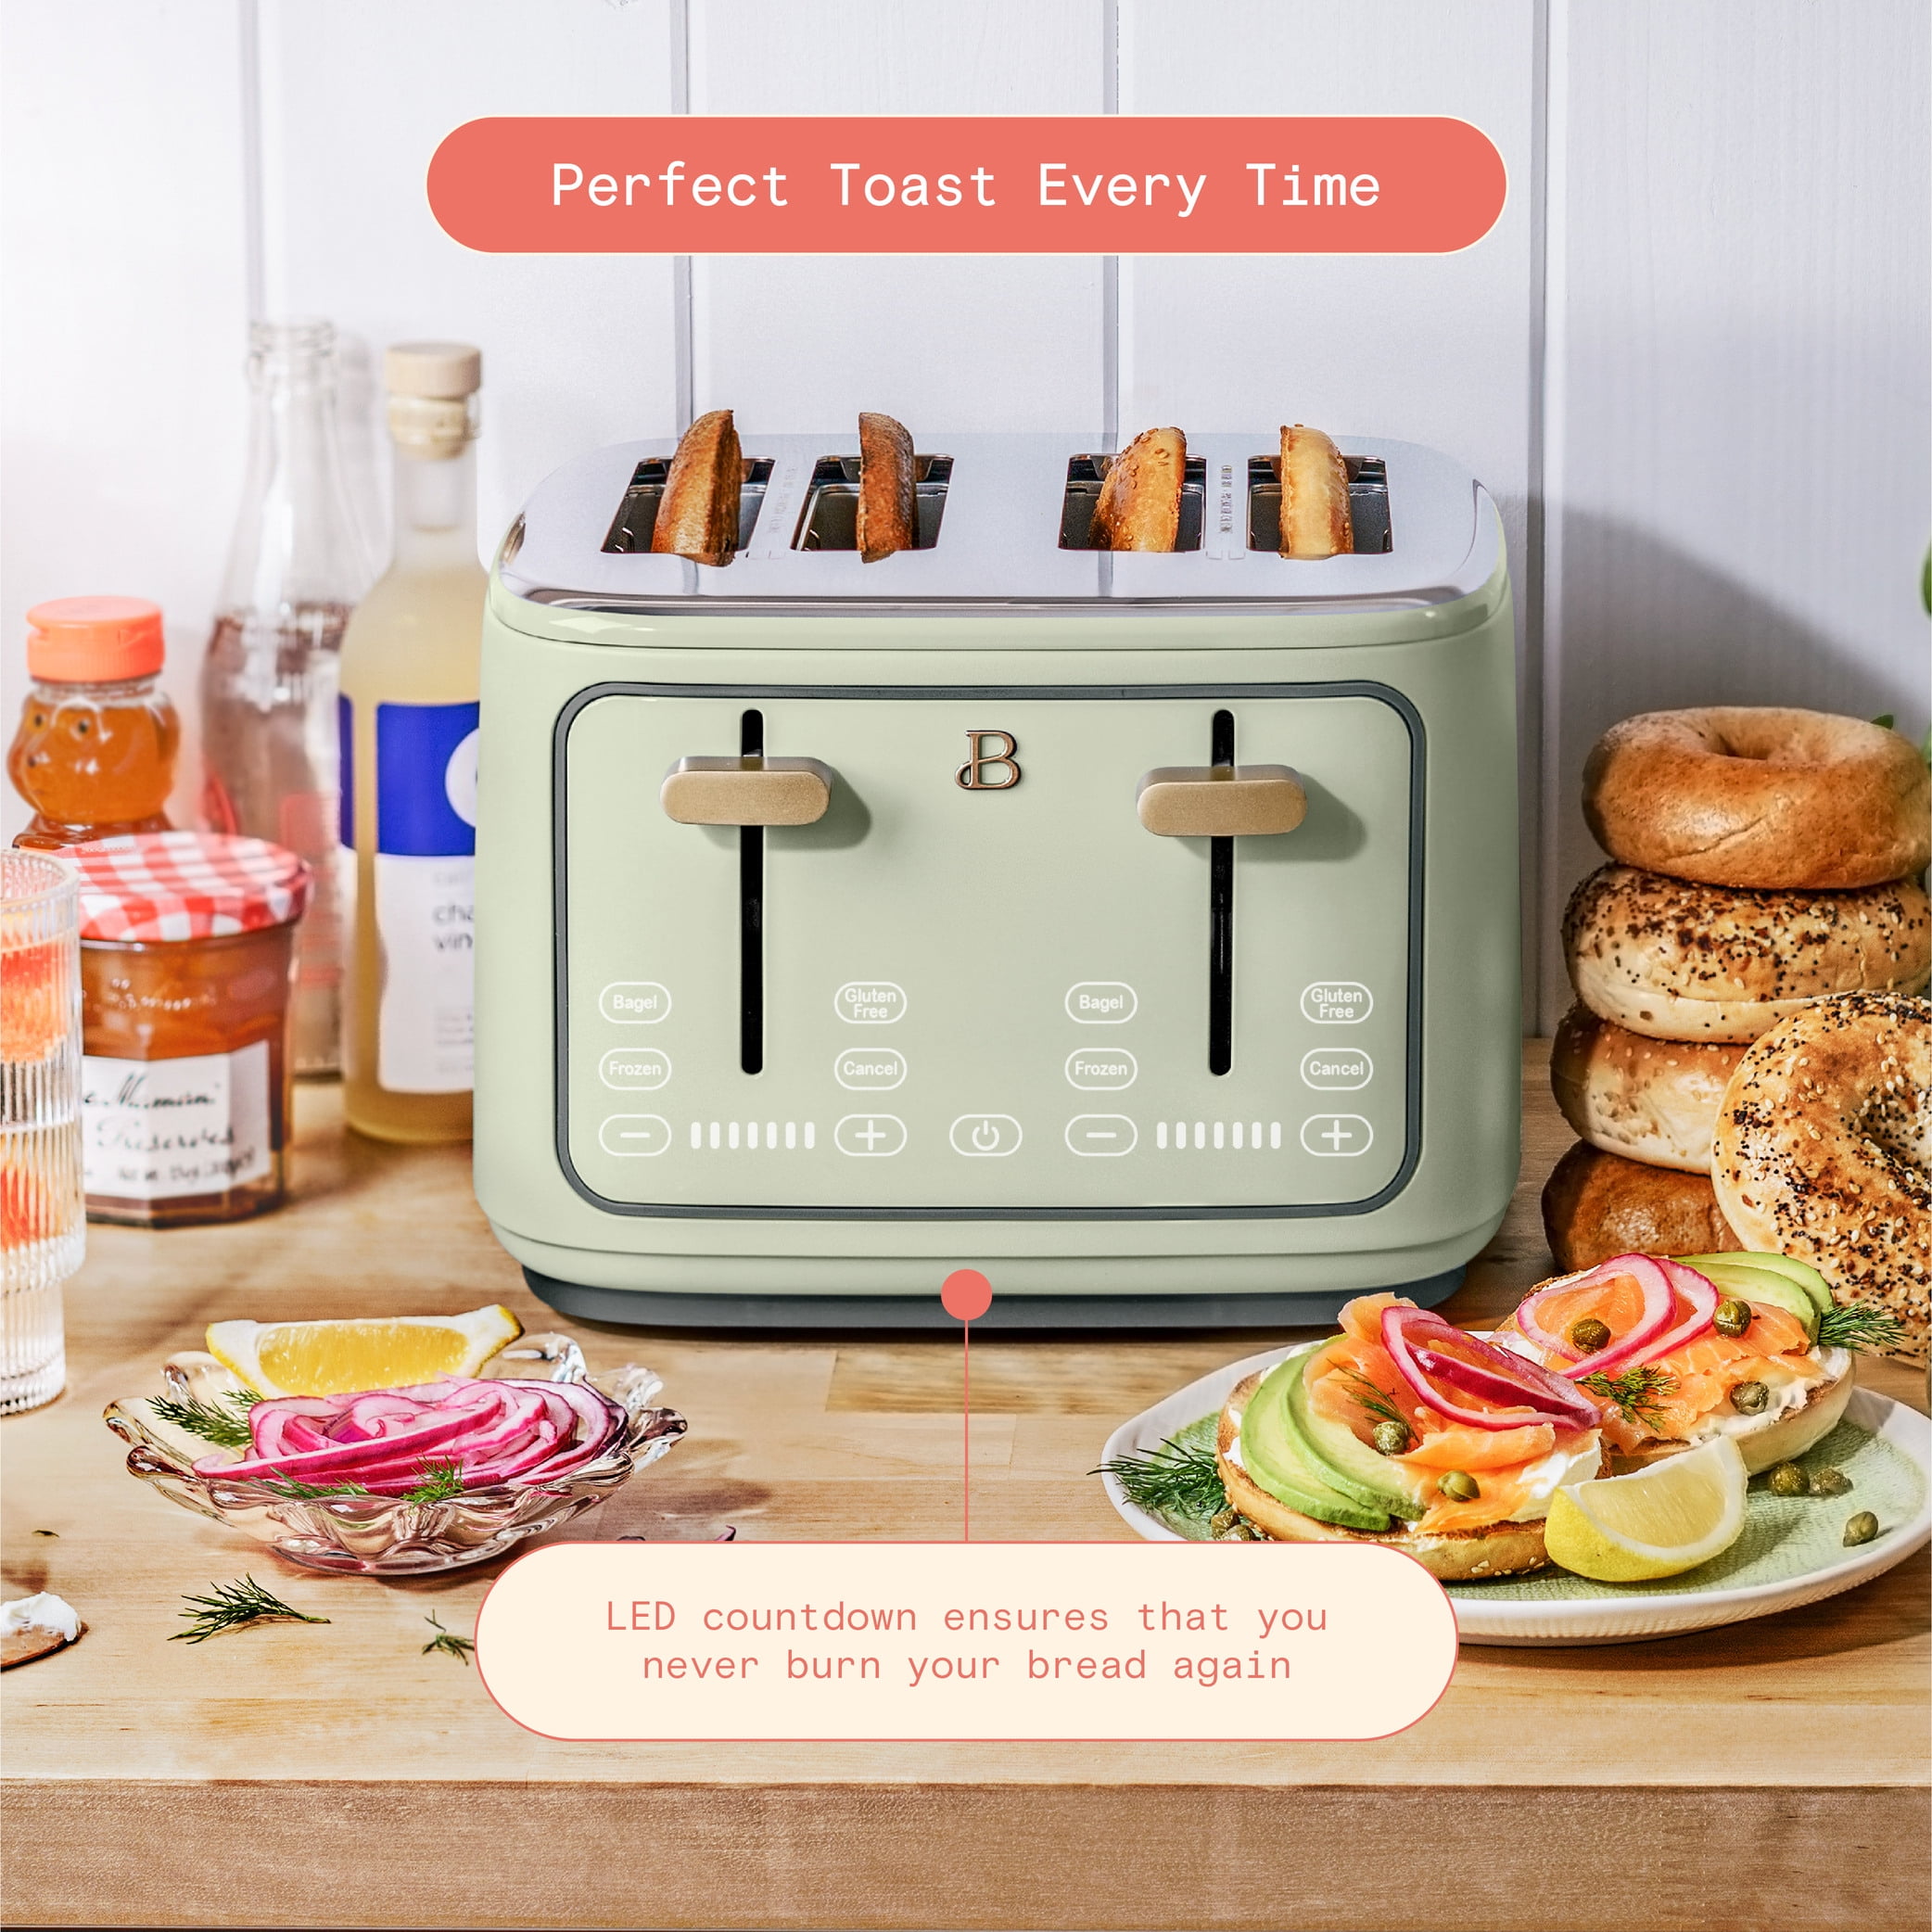 Unique Products from Japan – Morning Toaster